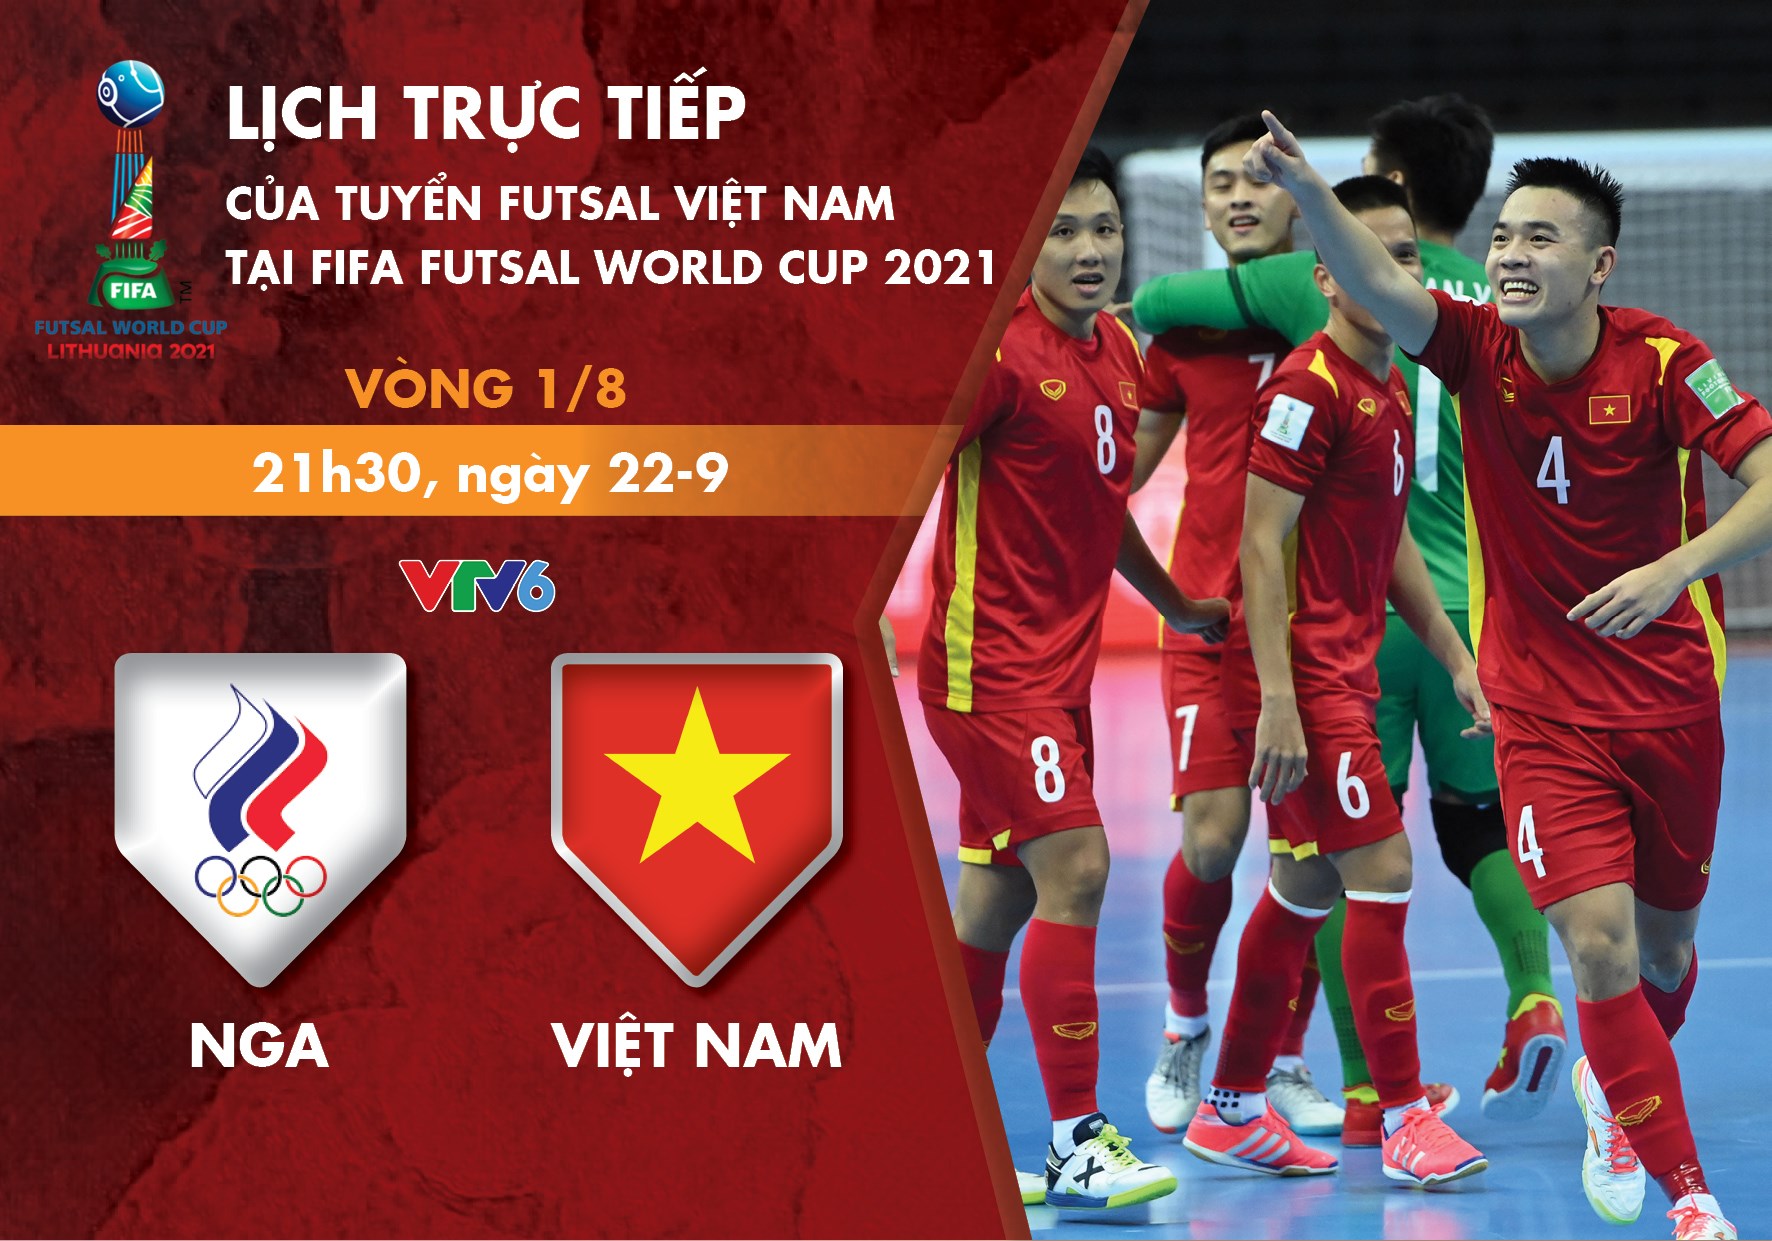 Vietnam brace for Round-of-16 game against Russia in FIFA Futsal World Cup